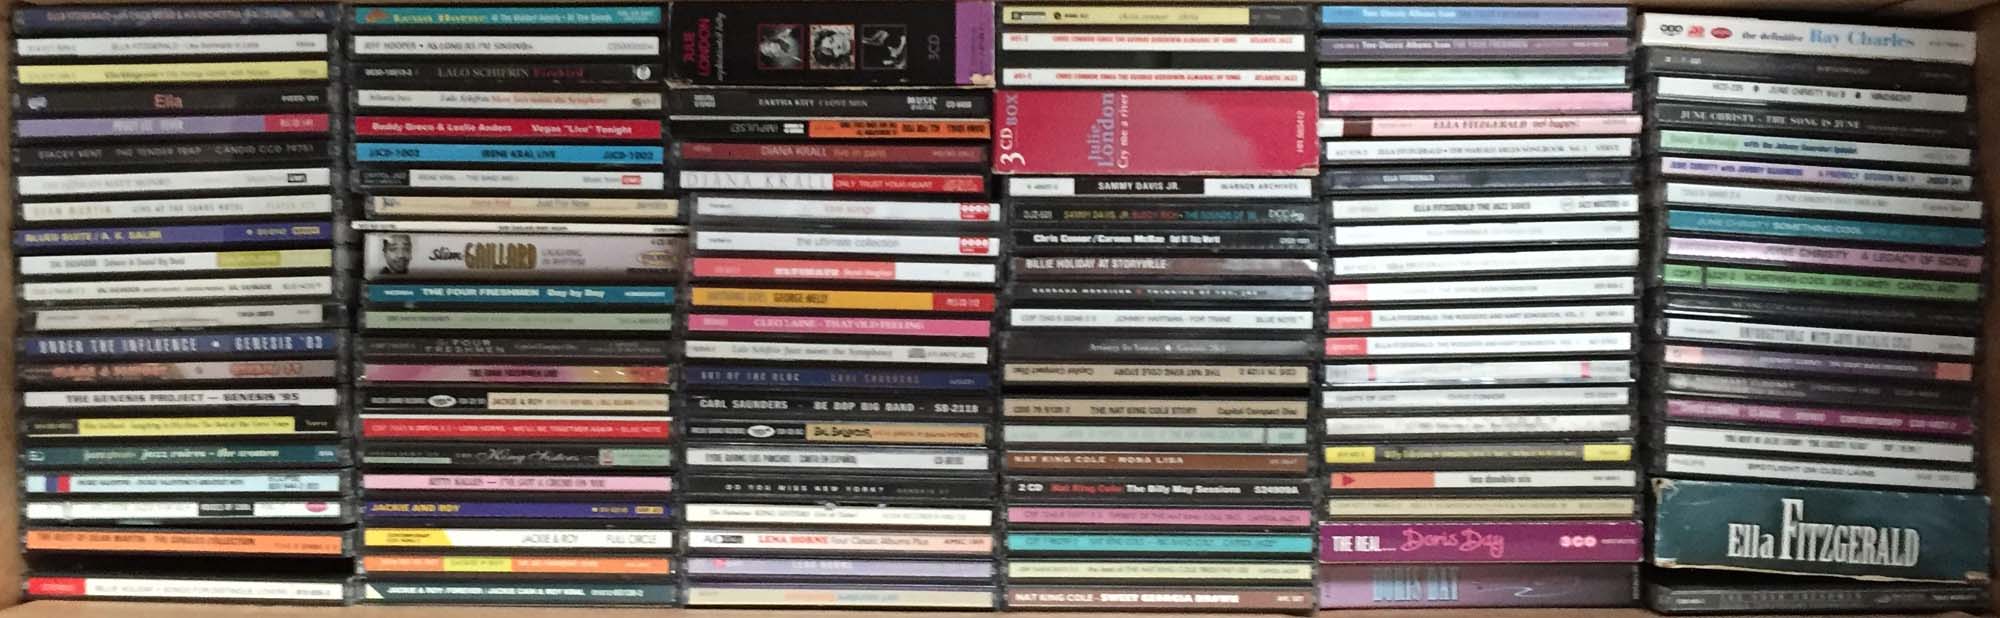 400 +JAZZ CDS. Excellent selection of Jazz CDs, with some box sets likely included. - Image 2 of 13